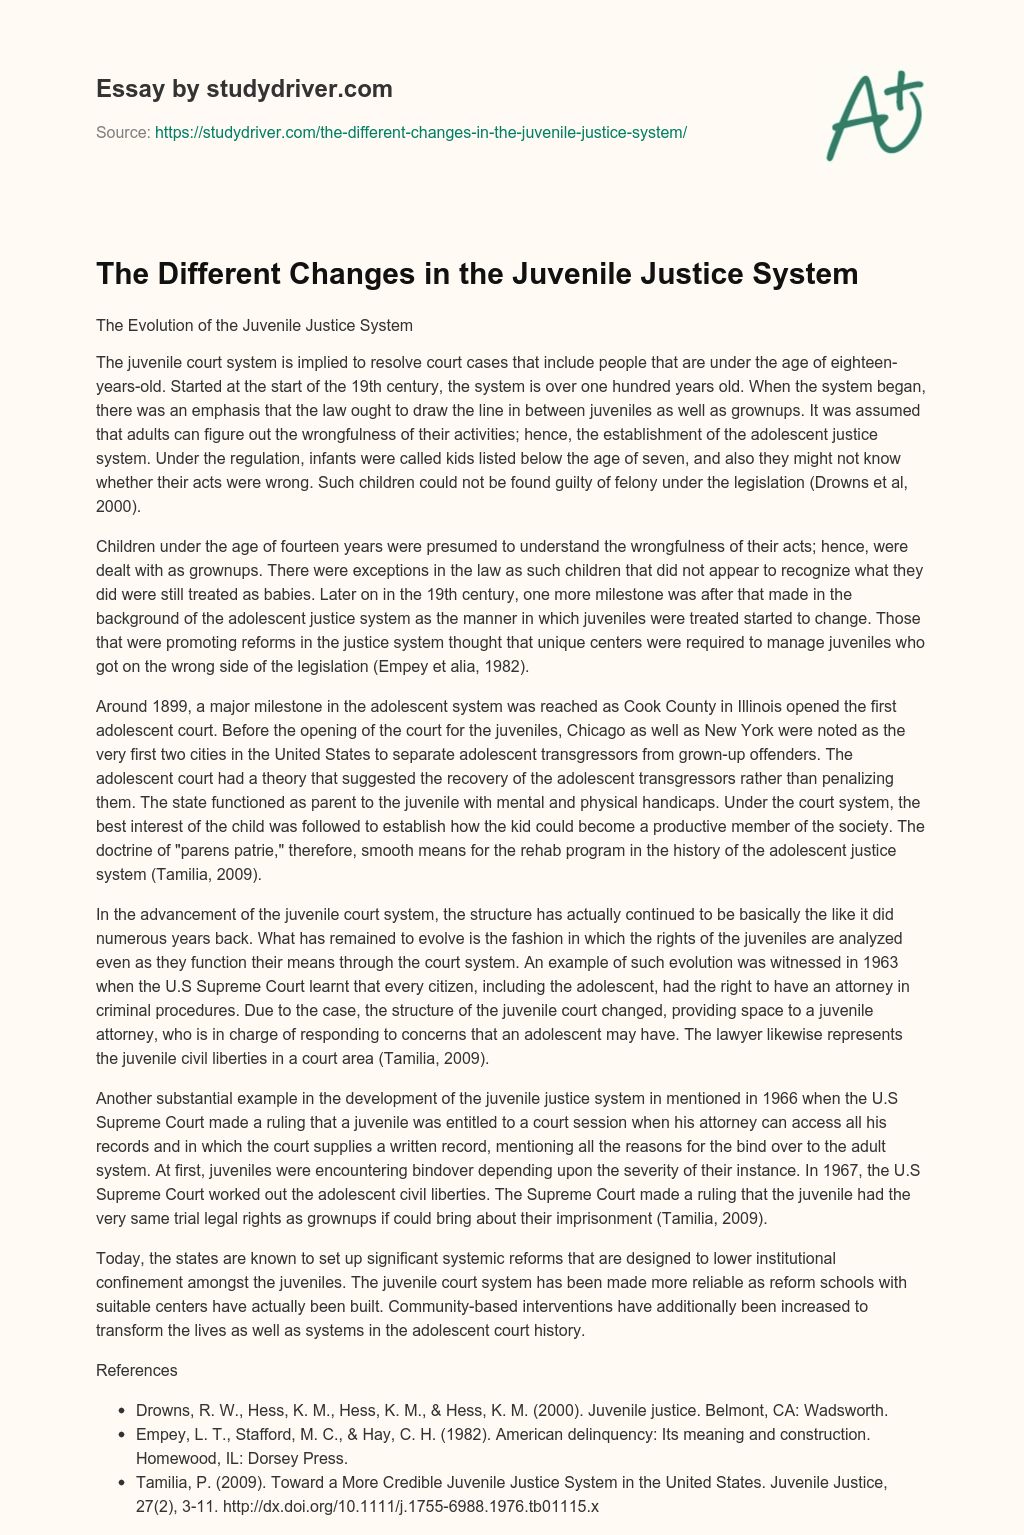 The Different Changes in the Juvenile Justice System essay